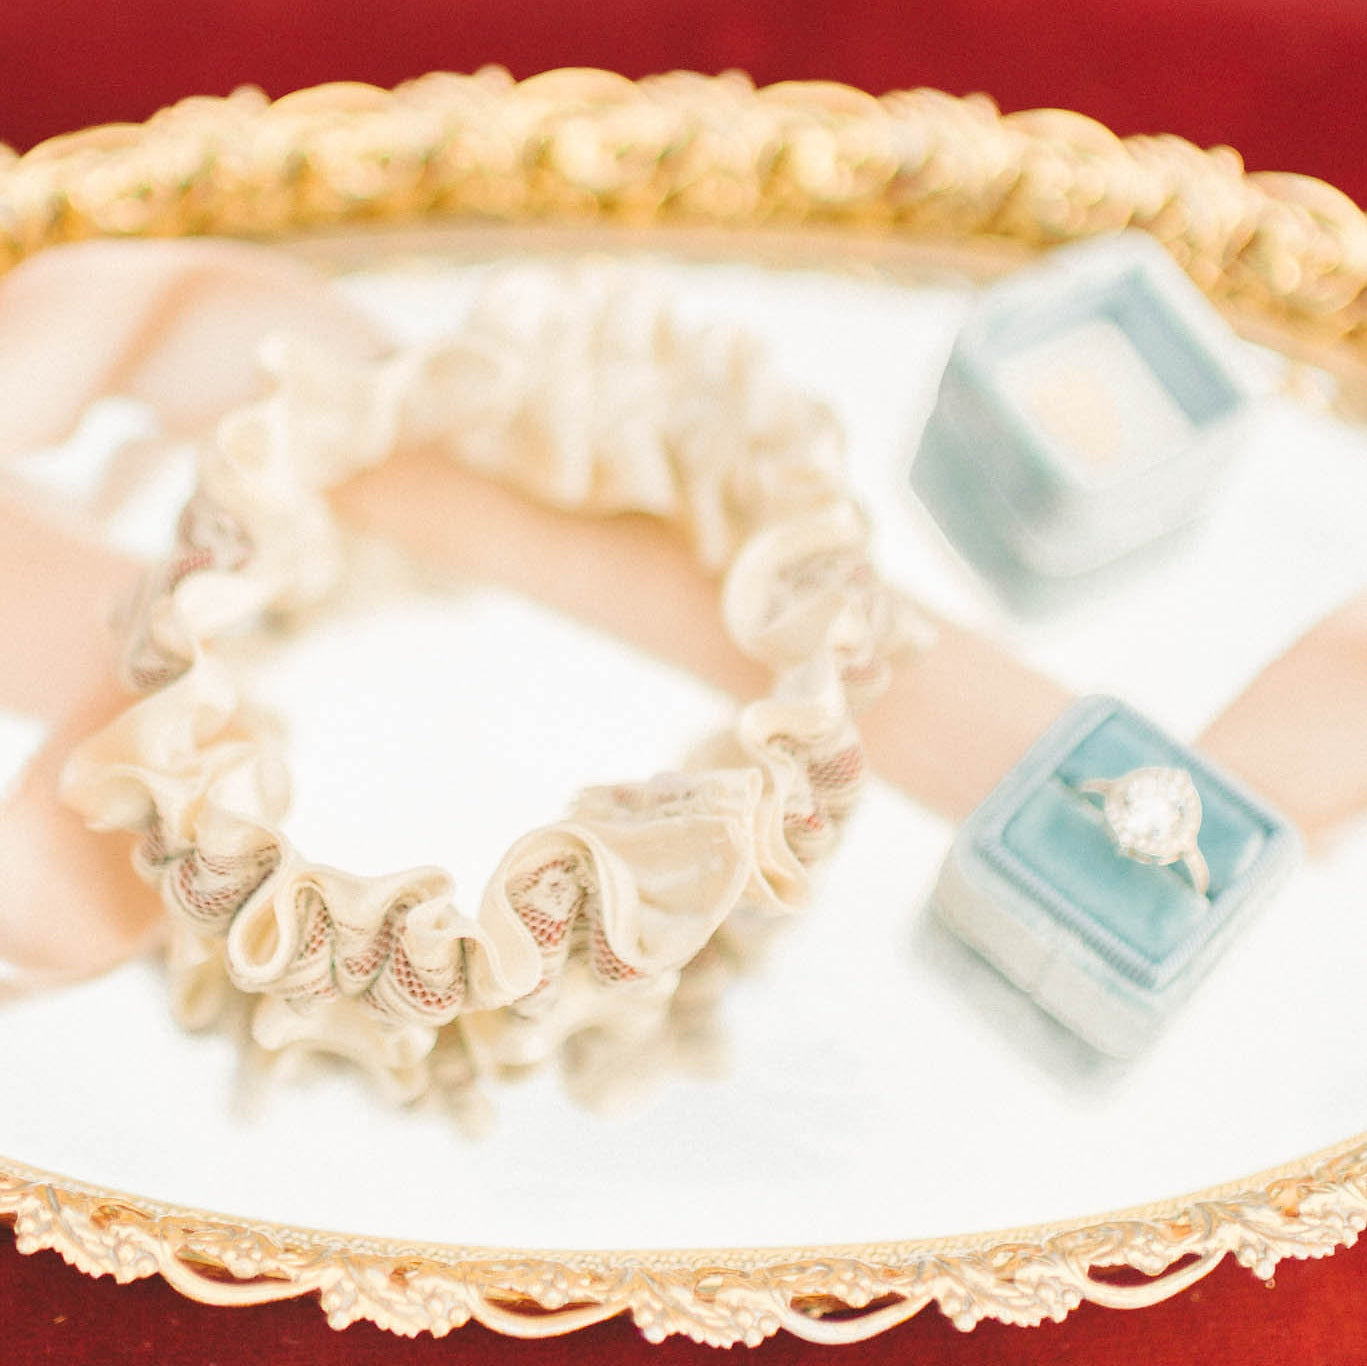 couture lace wedding garter by The Garter Girl